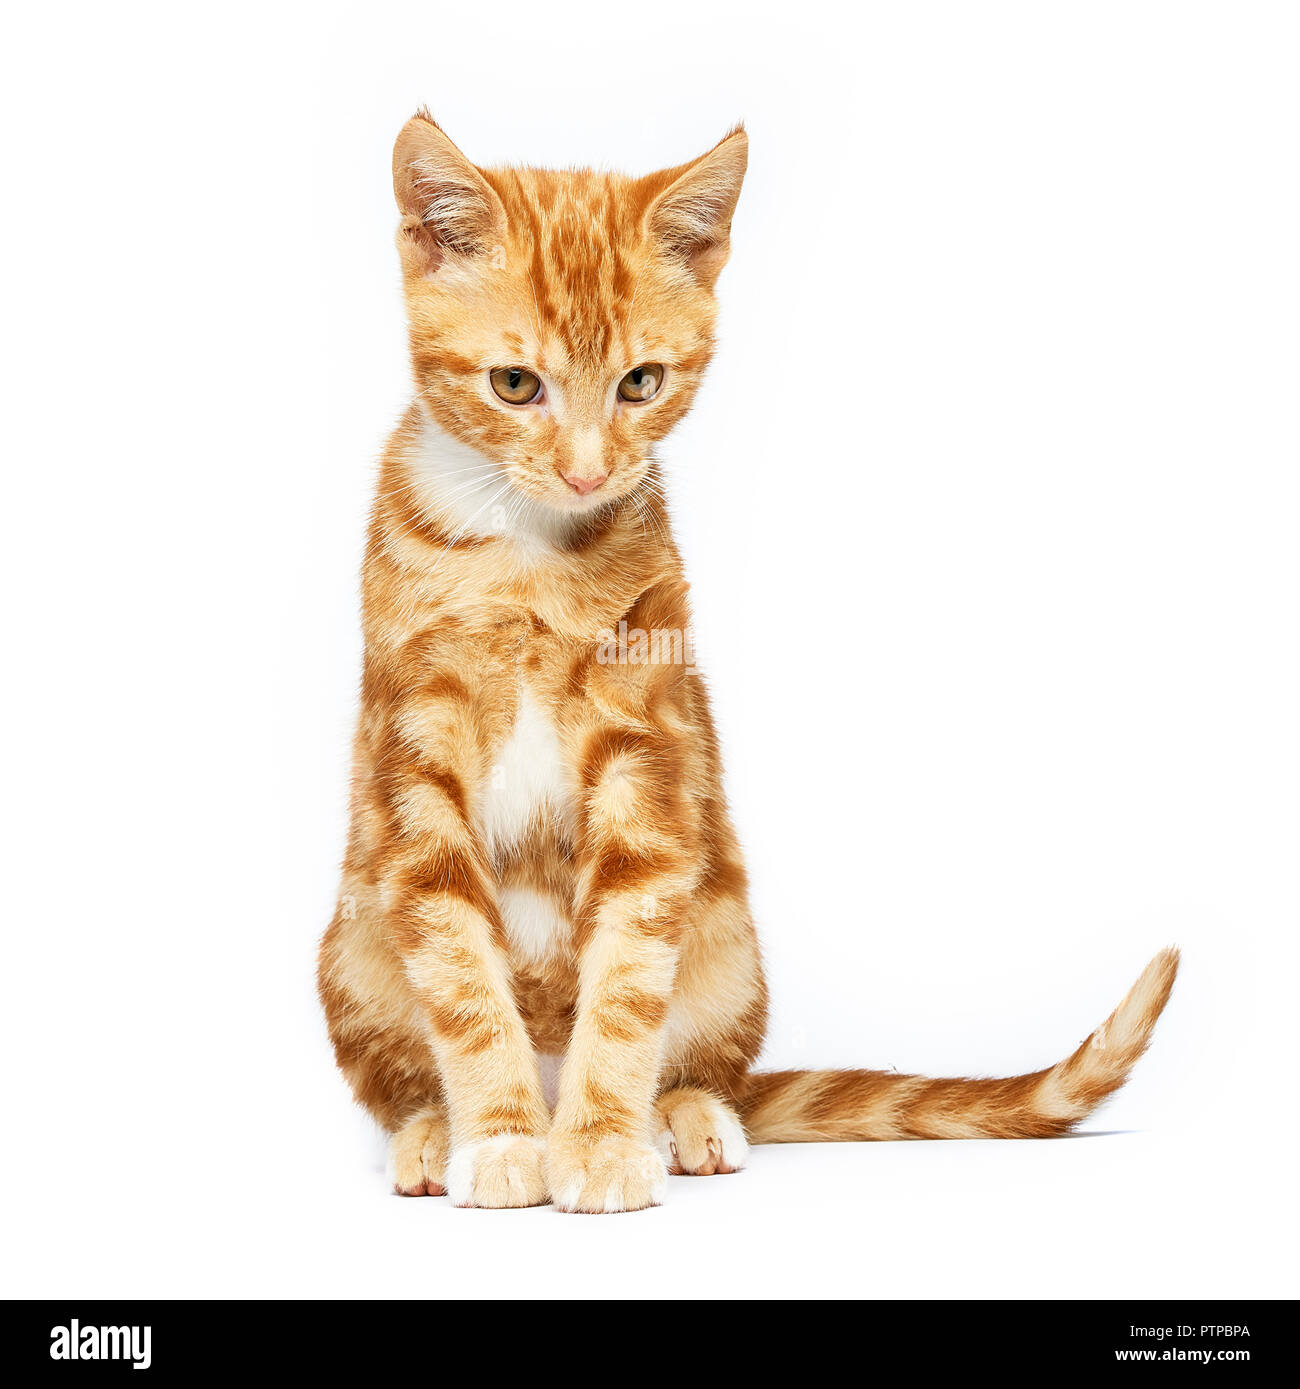 Adorable ginger red tabby kitten isolated on a white background with ears like devil horns. Stock Photo